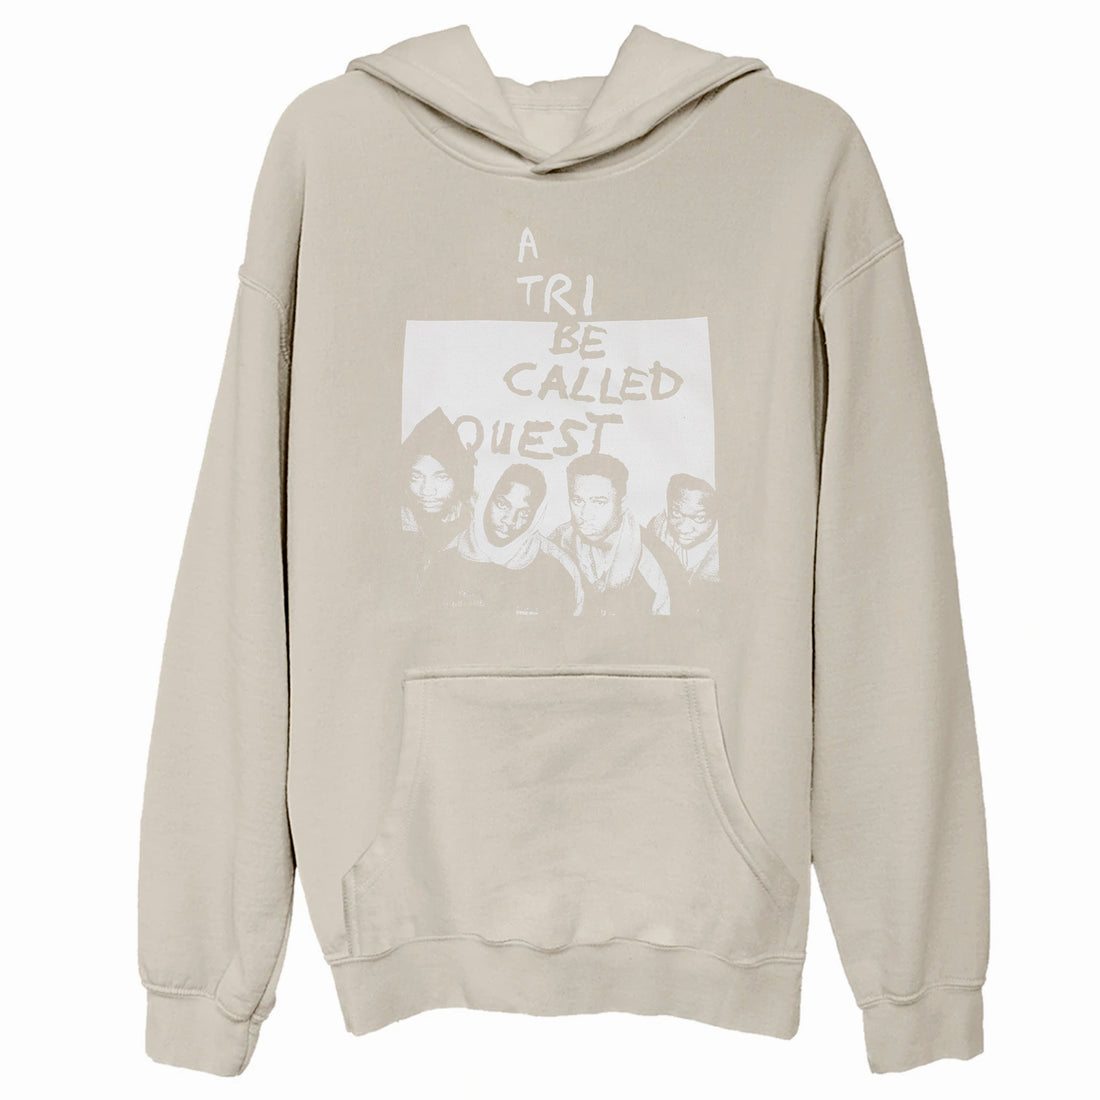 A Tribe Called Quest Group Hooded Sweatshirt